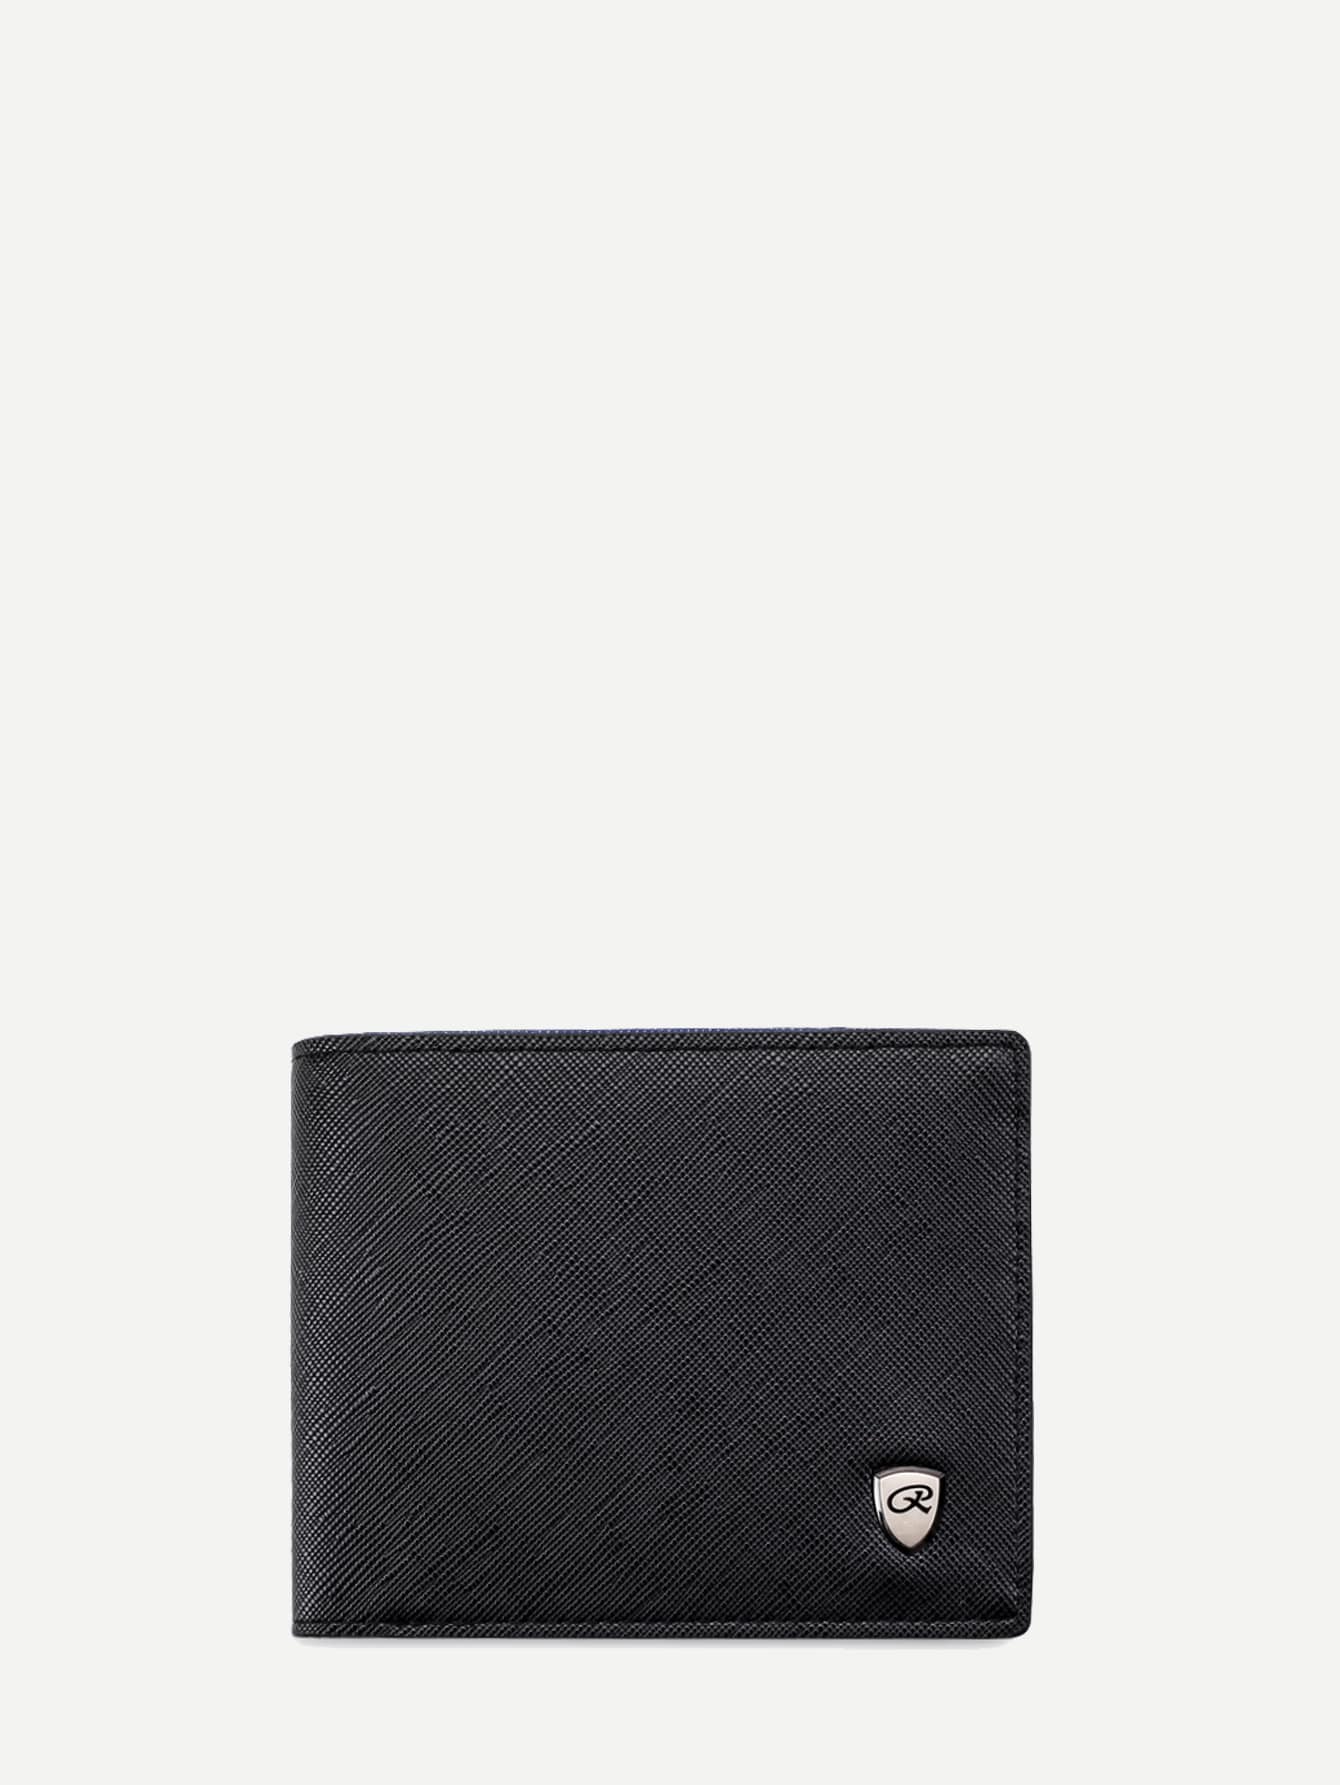 PU Leather Black Fold Over Wallet With Card Slot